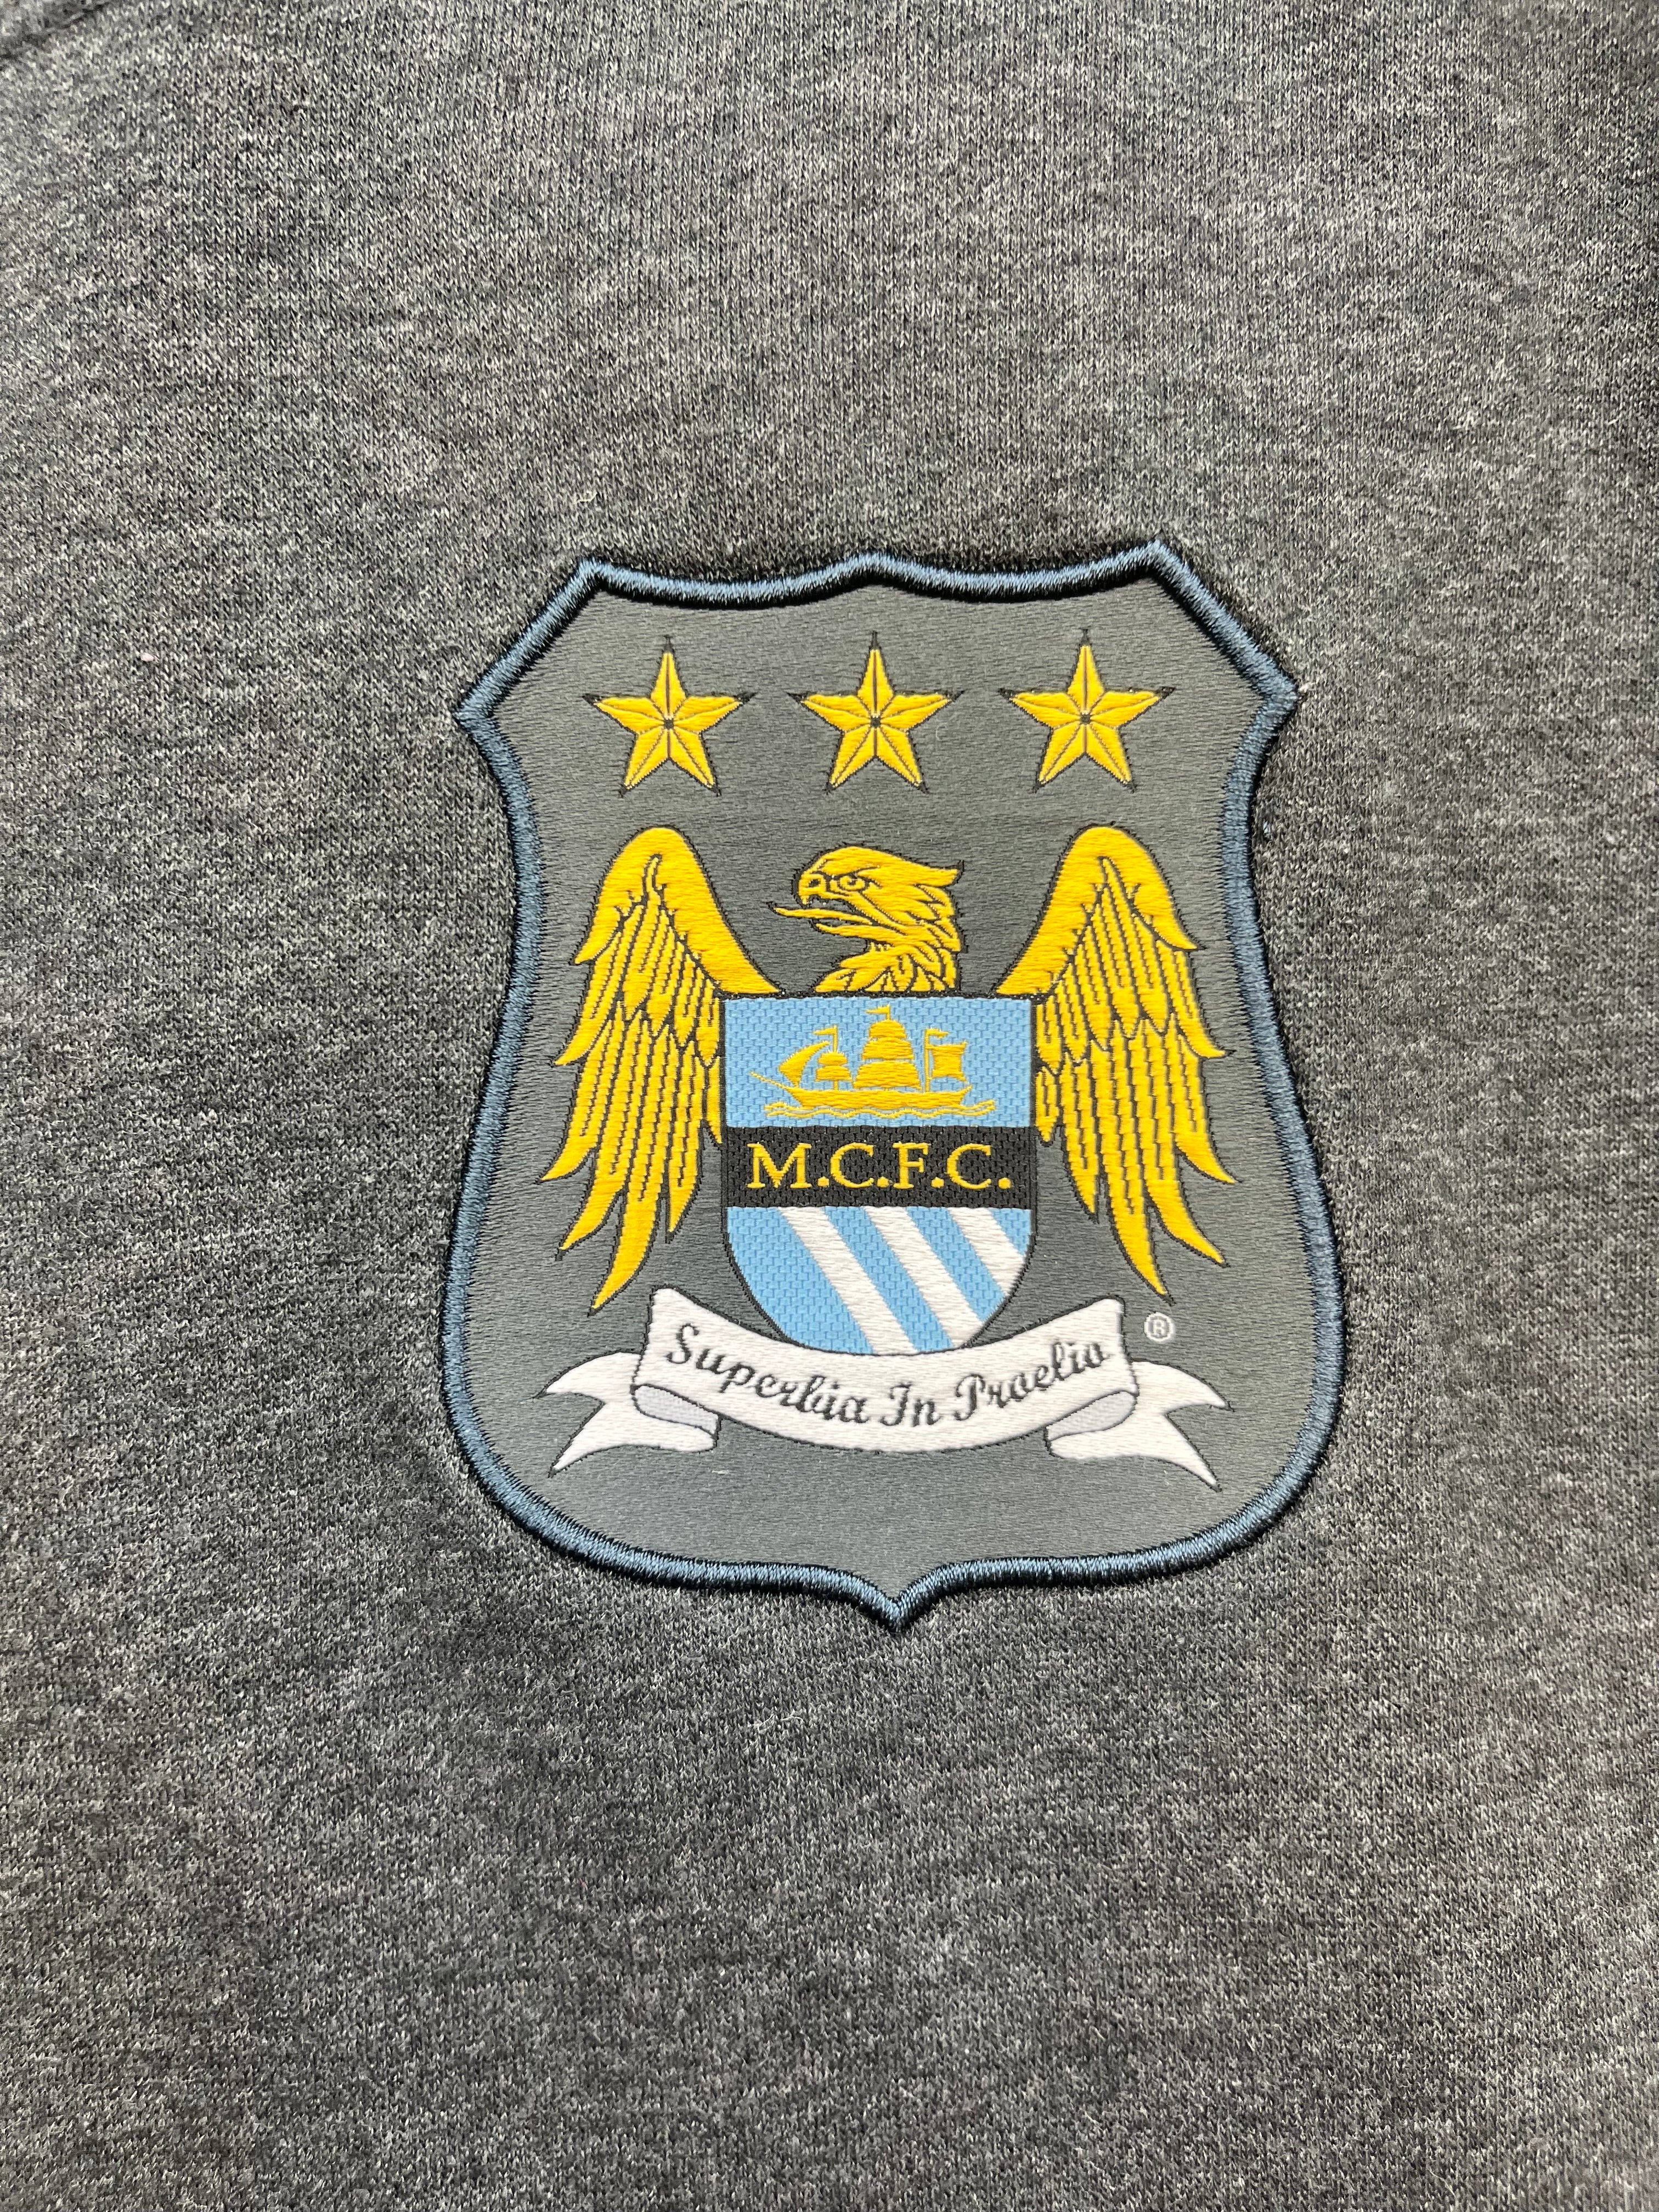 2014/15 Manchester City Hoodie (M) 9/10